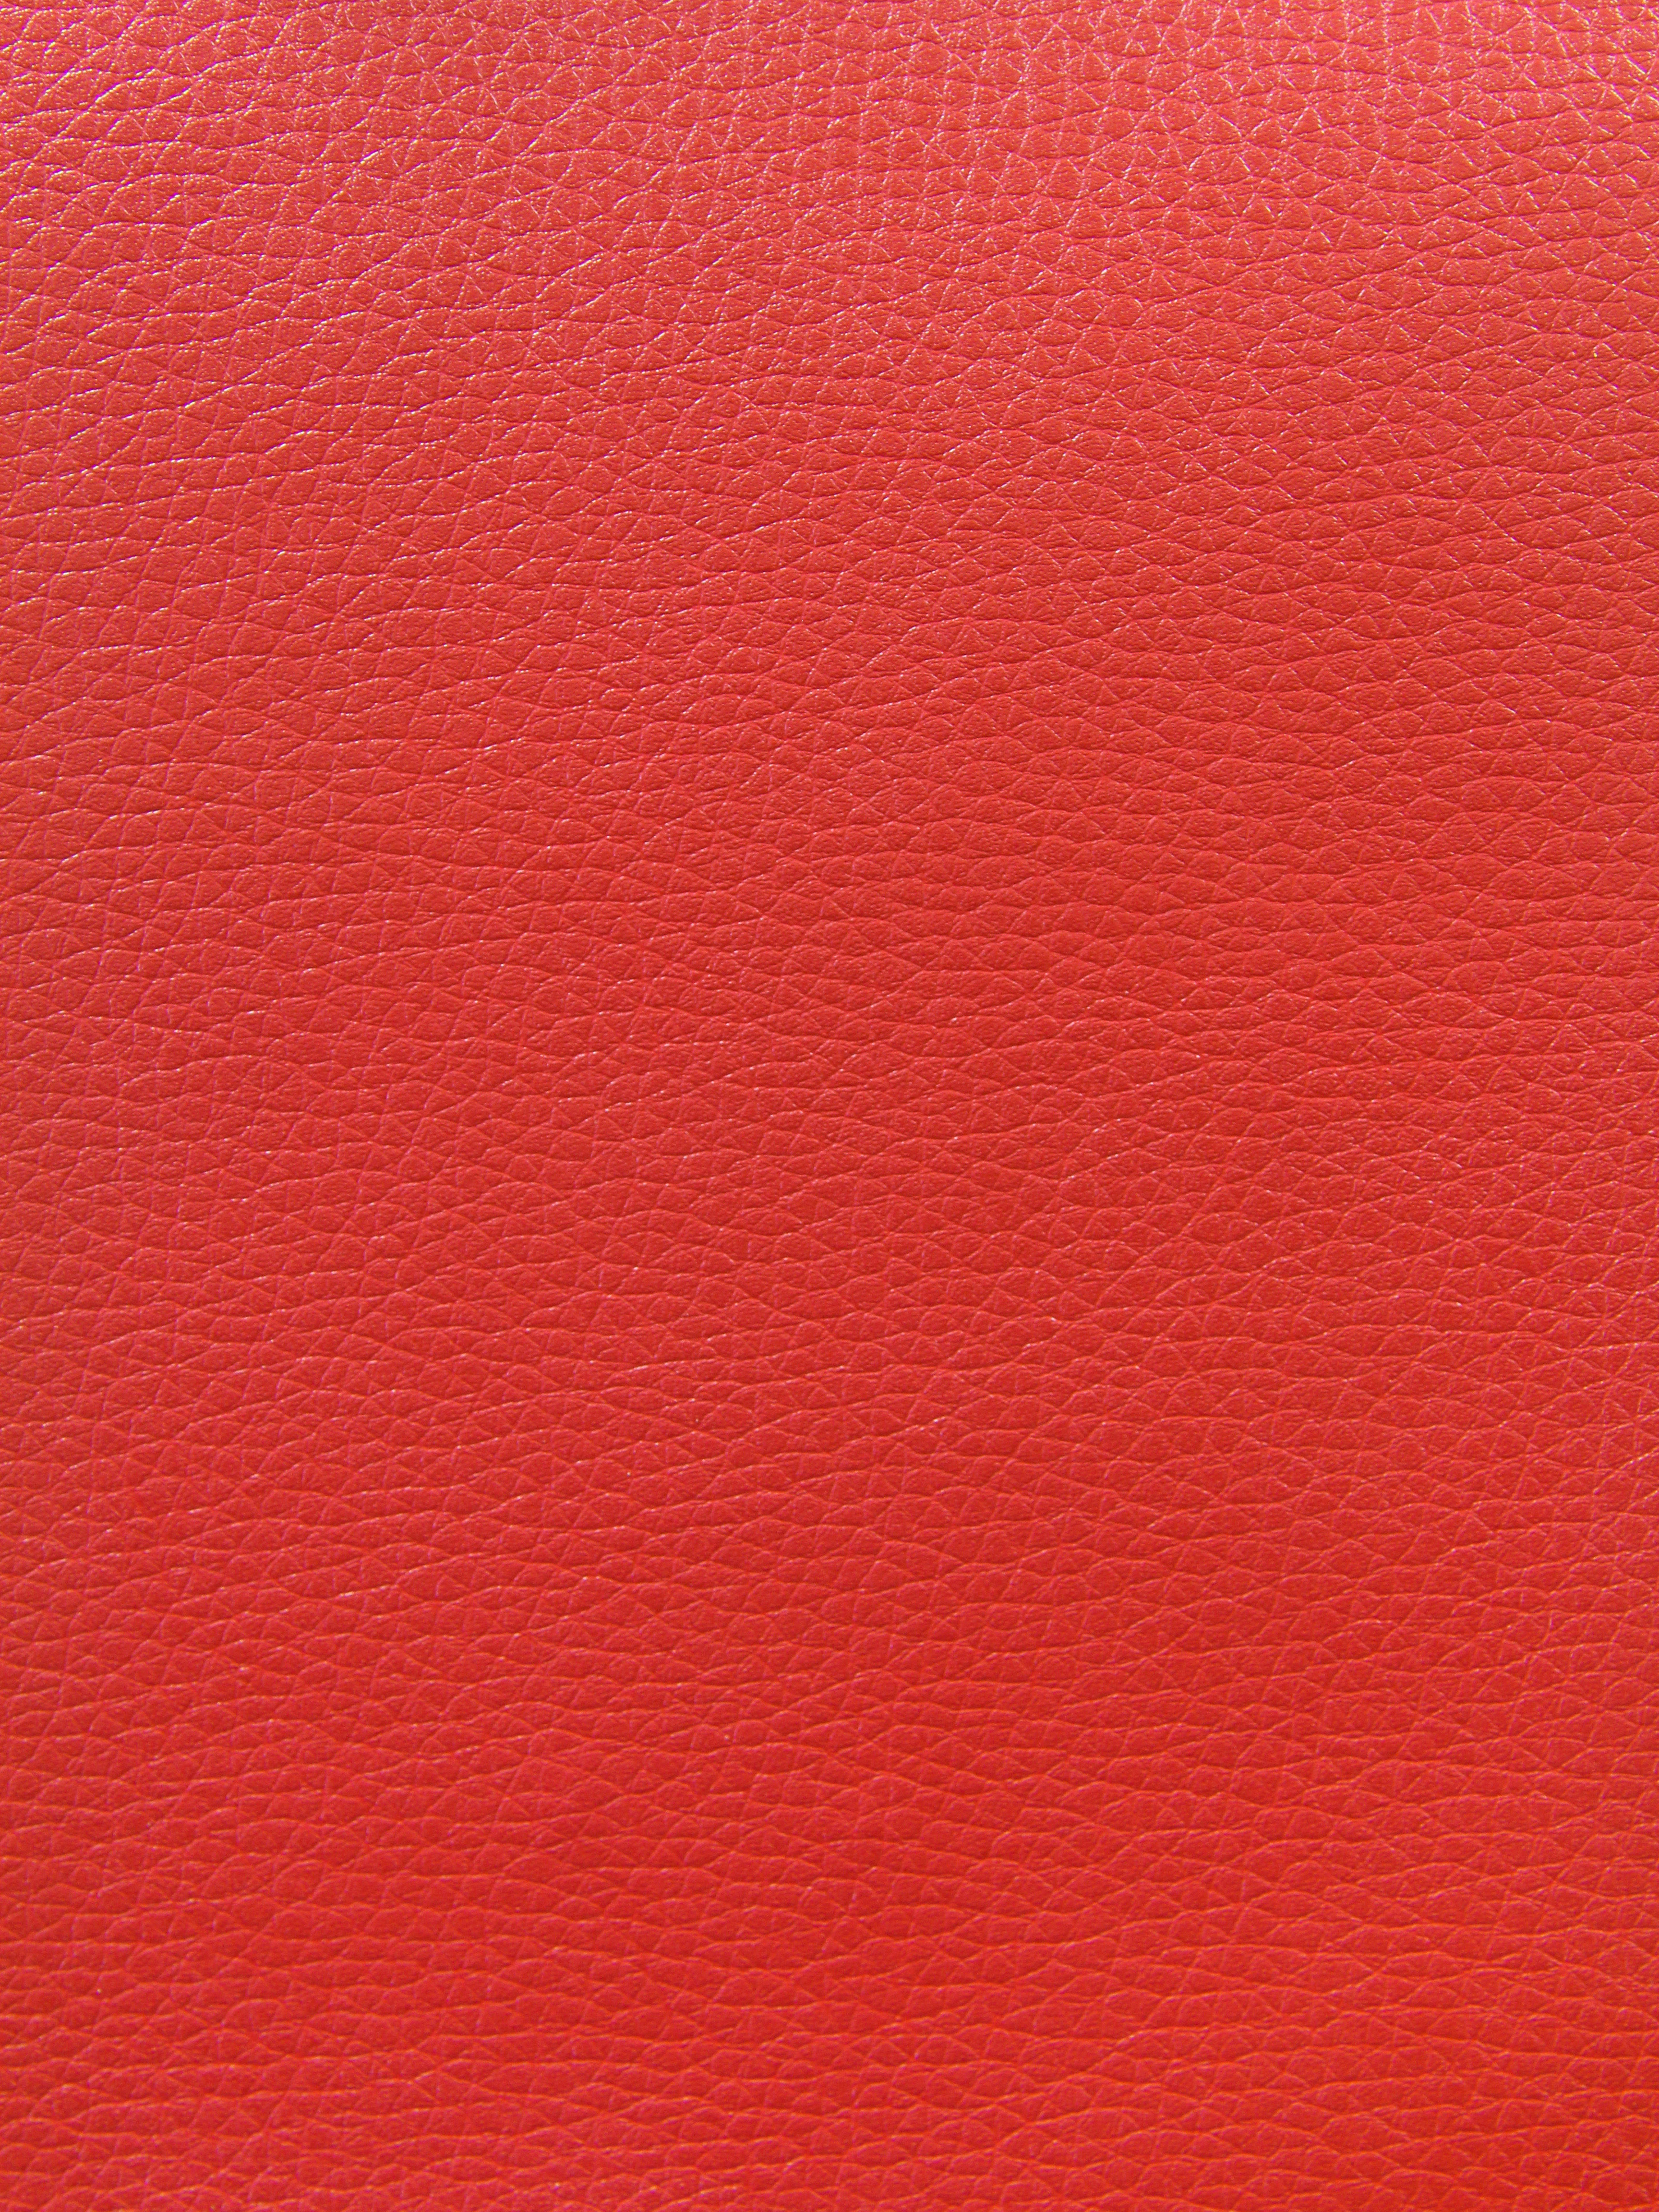 Deep red leather texture background Stock Photo